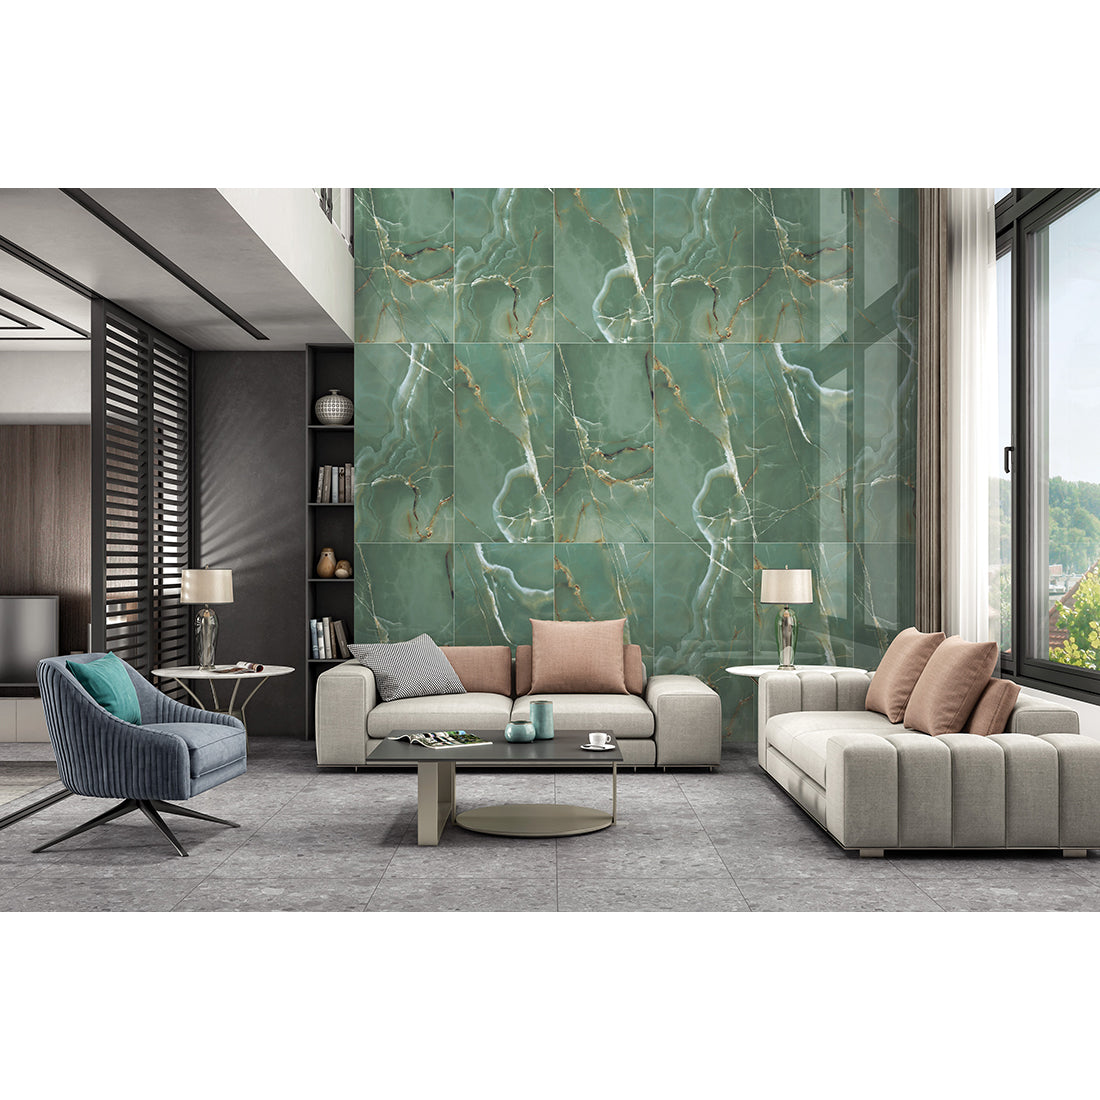 Onyx Real 60x120cm Green Porcelain Polished Wall & Floor Tile